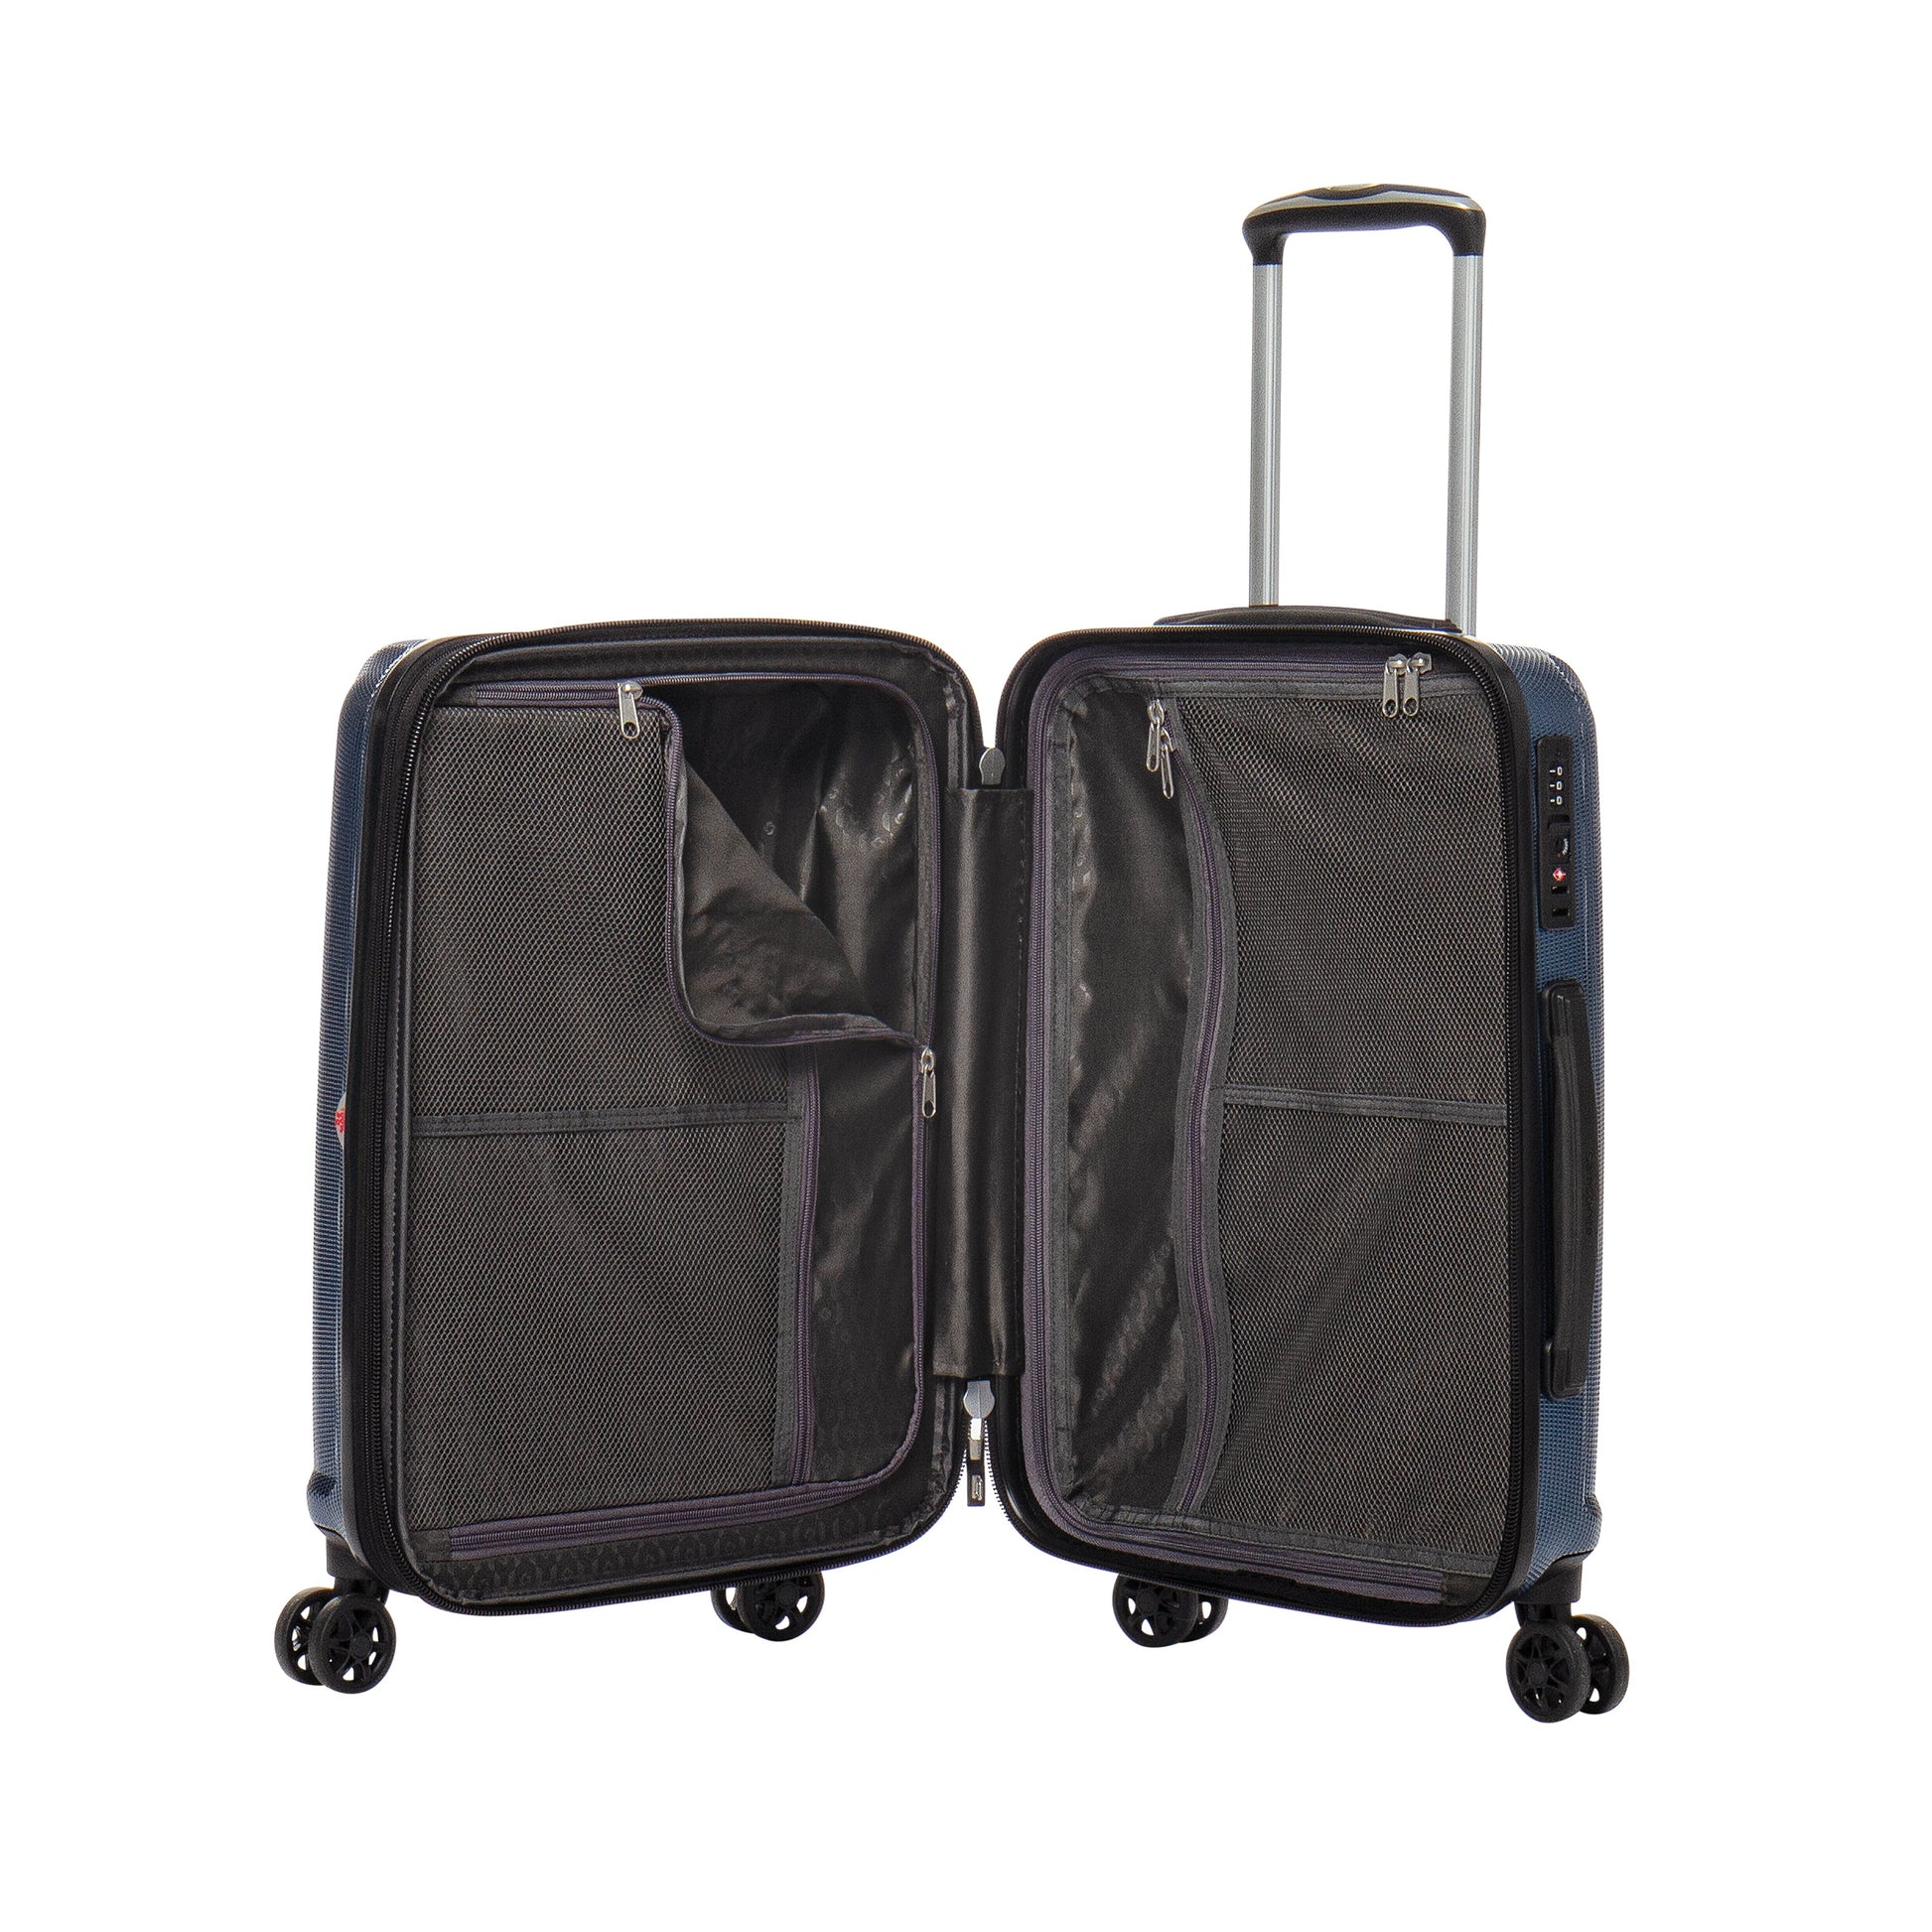 Samsonite Omni 3.0 Carry-On Spinner Expandable Luggage